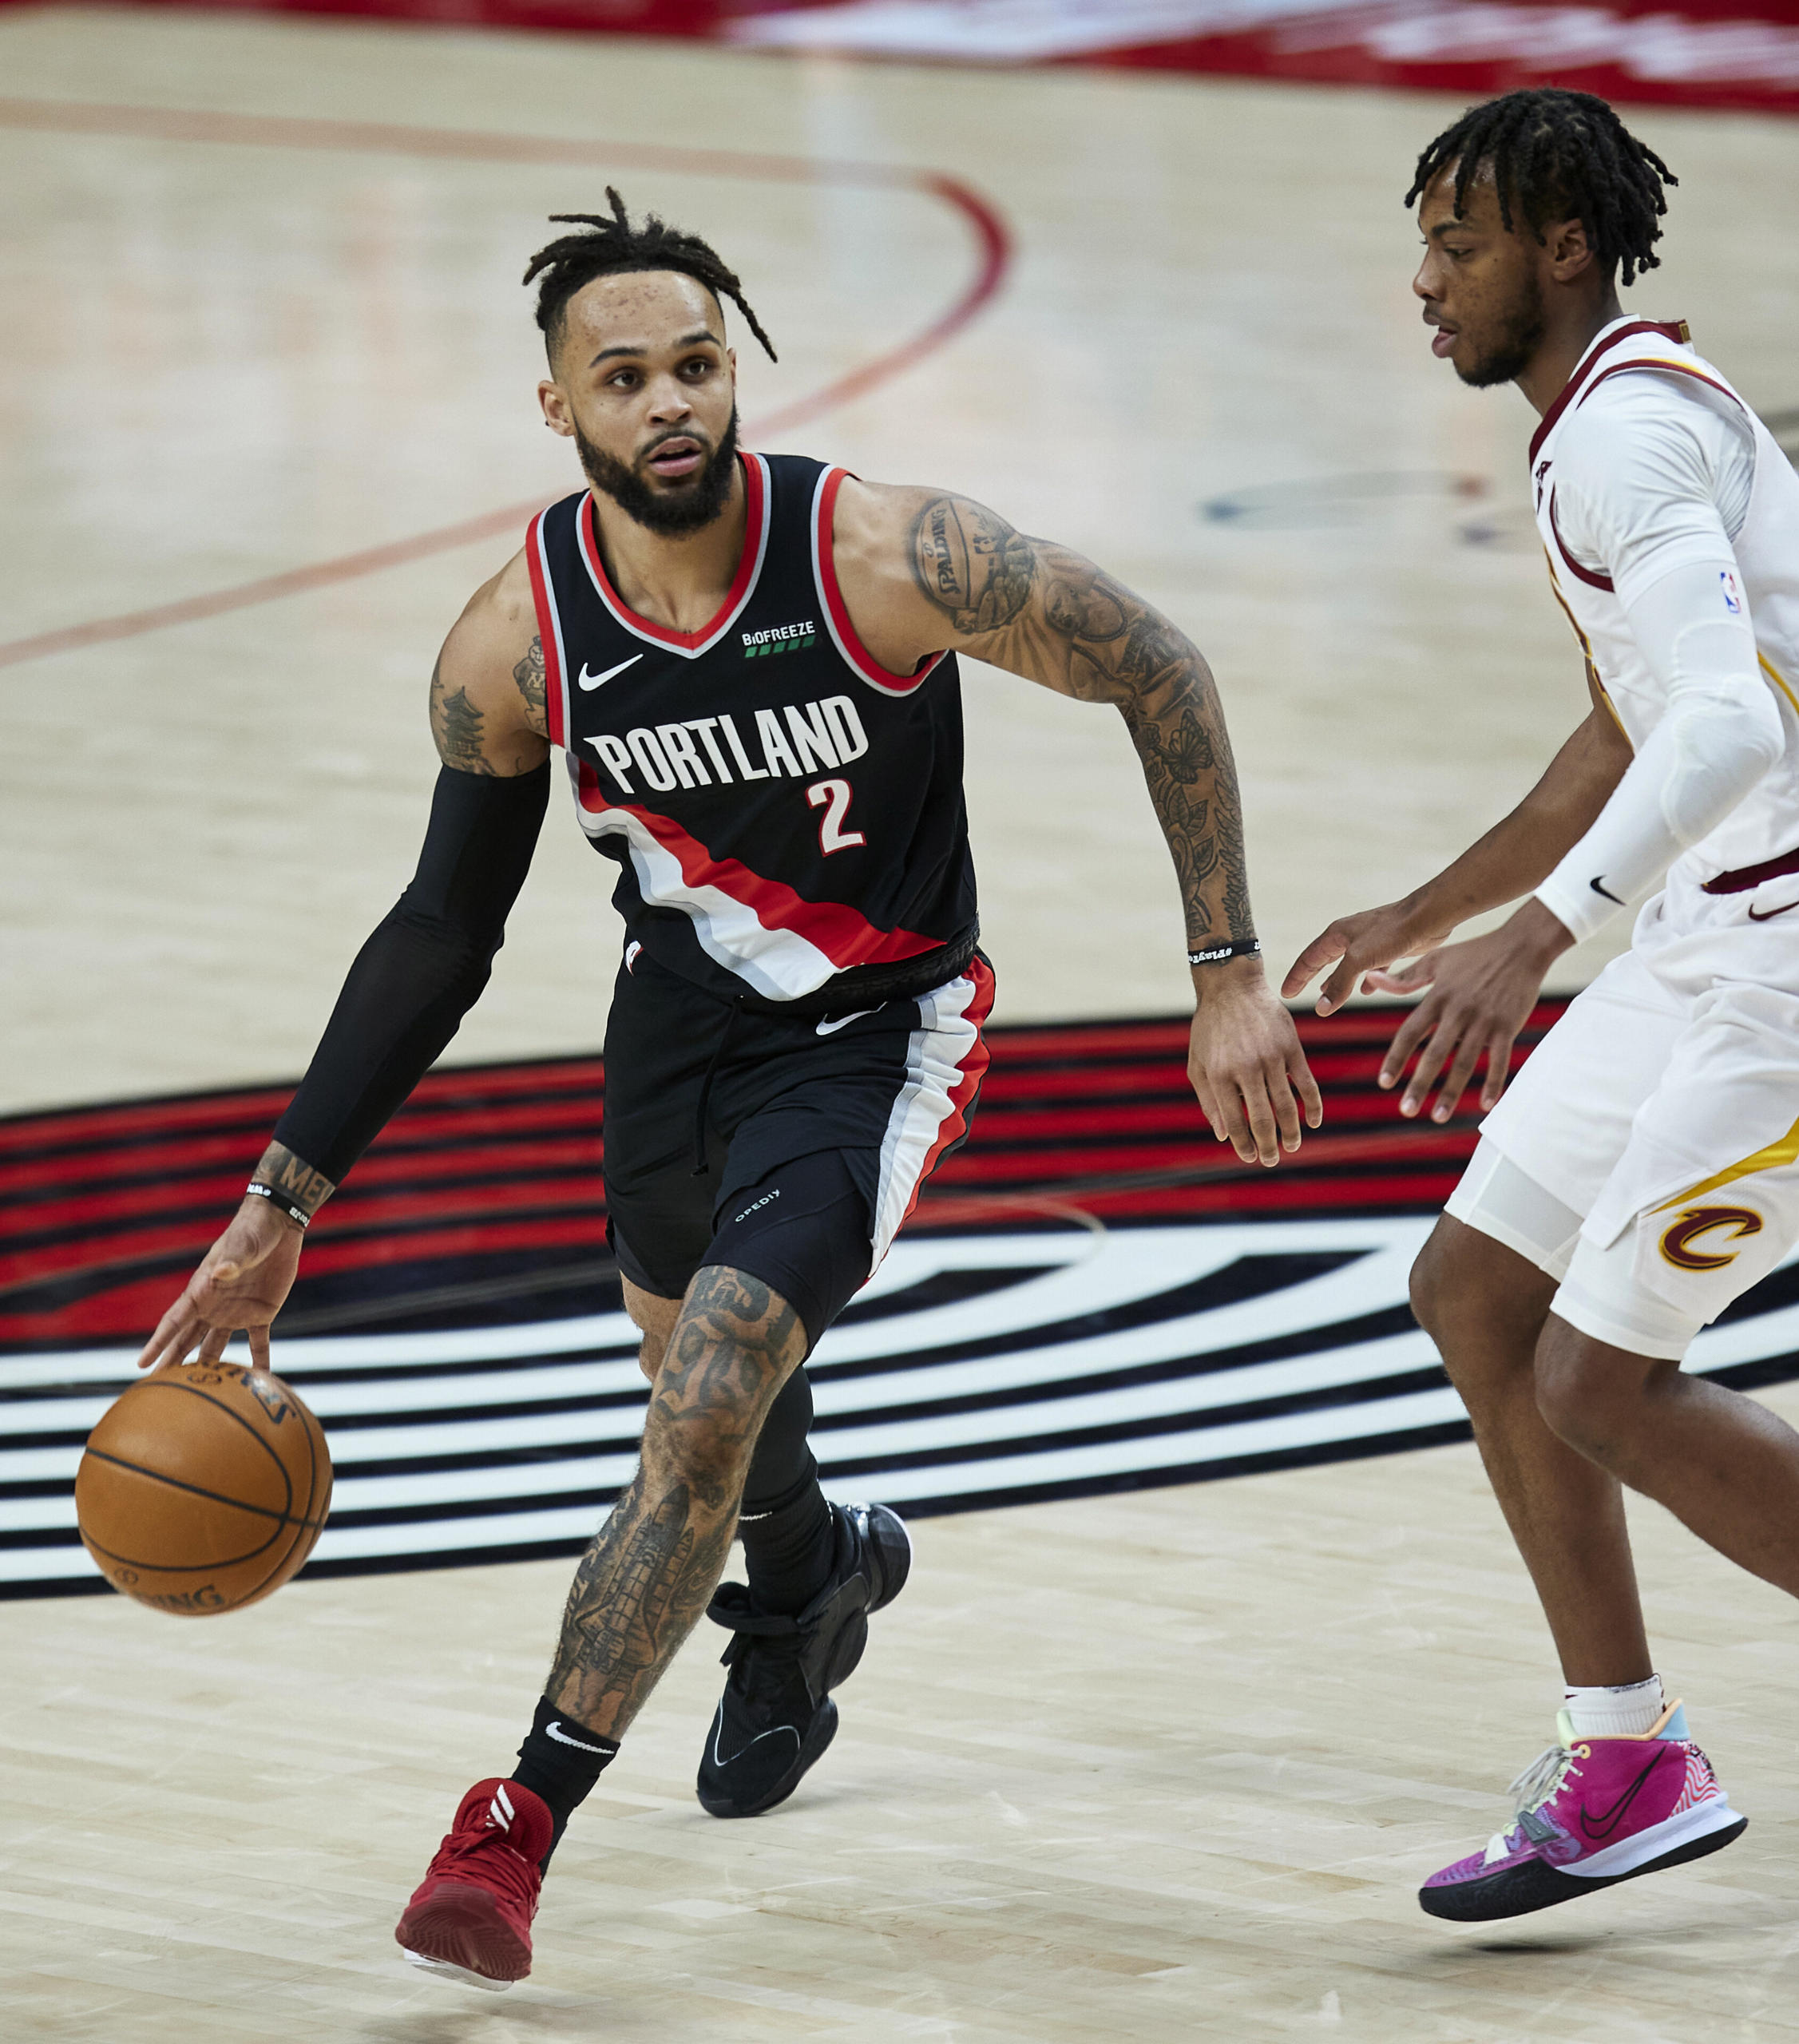 Portland Trail Blazers guard Gary Trent Jr., left, works around Cleveland Cavaliers guard Darius Garland during the second half of an NBA basketball game in Portland, Ore., Friday, Feb. 12, 2021.